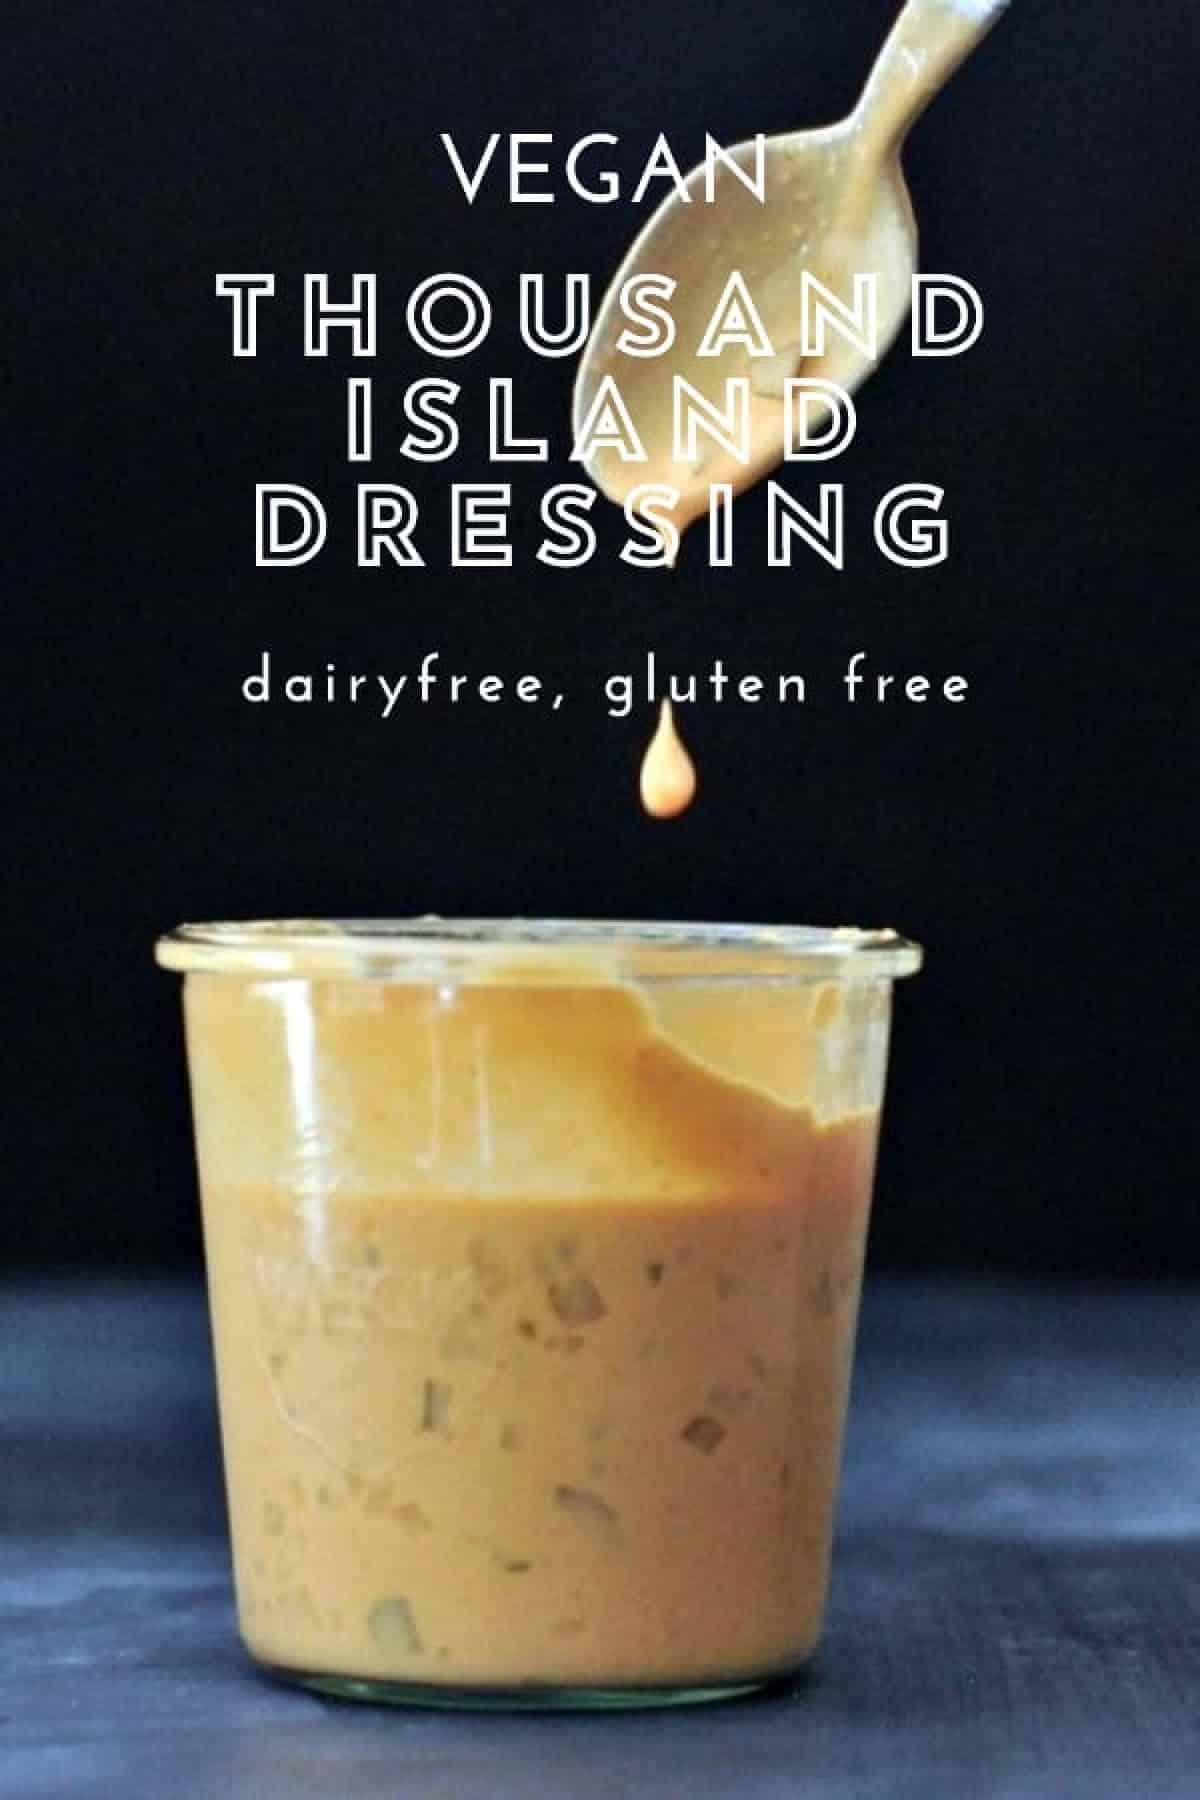 A large glass Weck jar of vegan thousand island dressing, with a spoon dripping sauce above the jar against a black background.